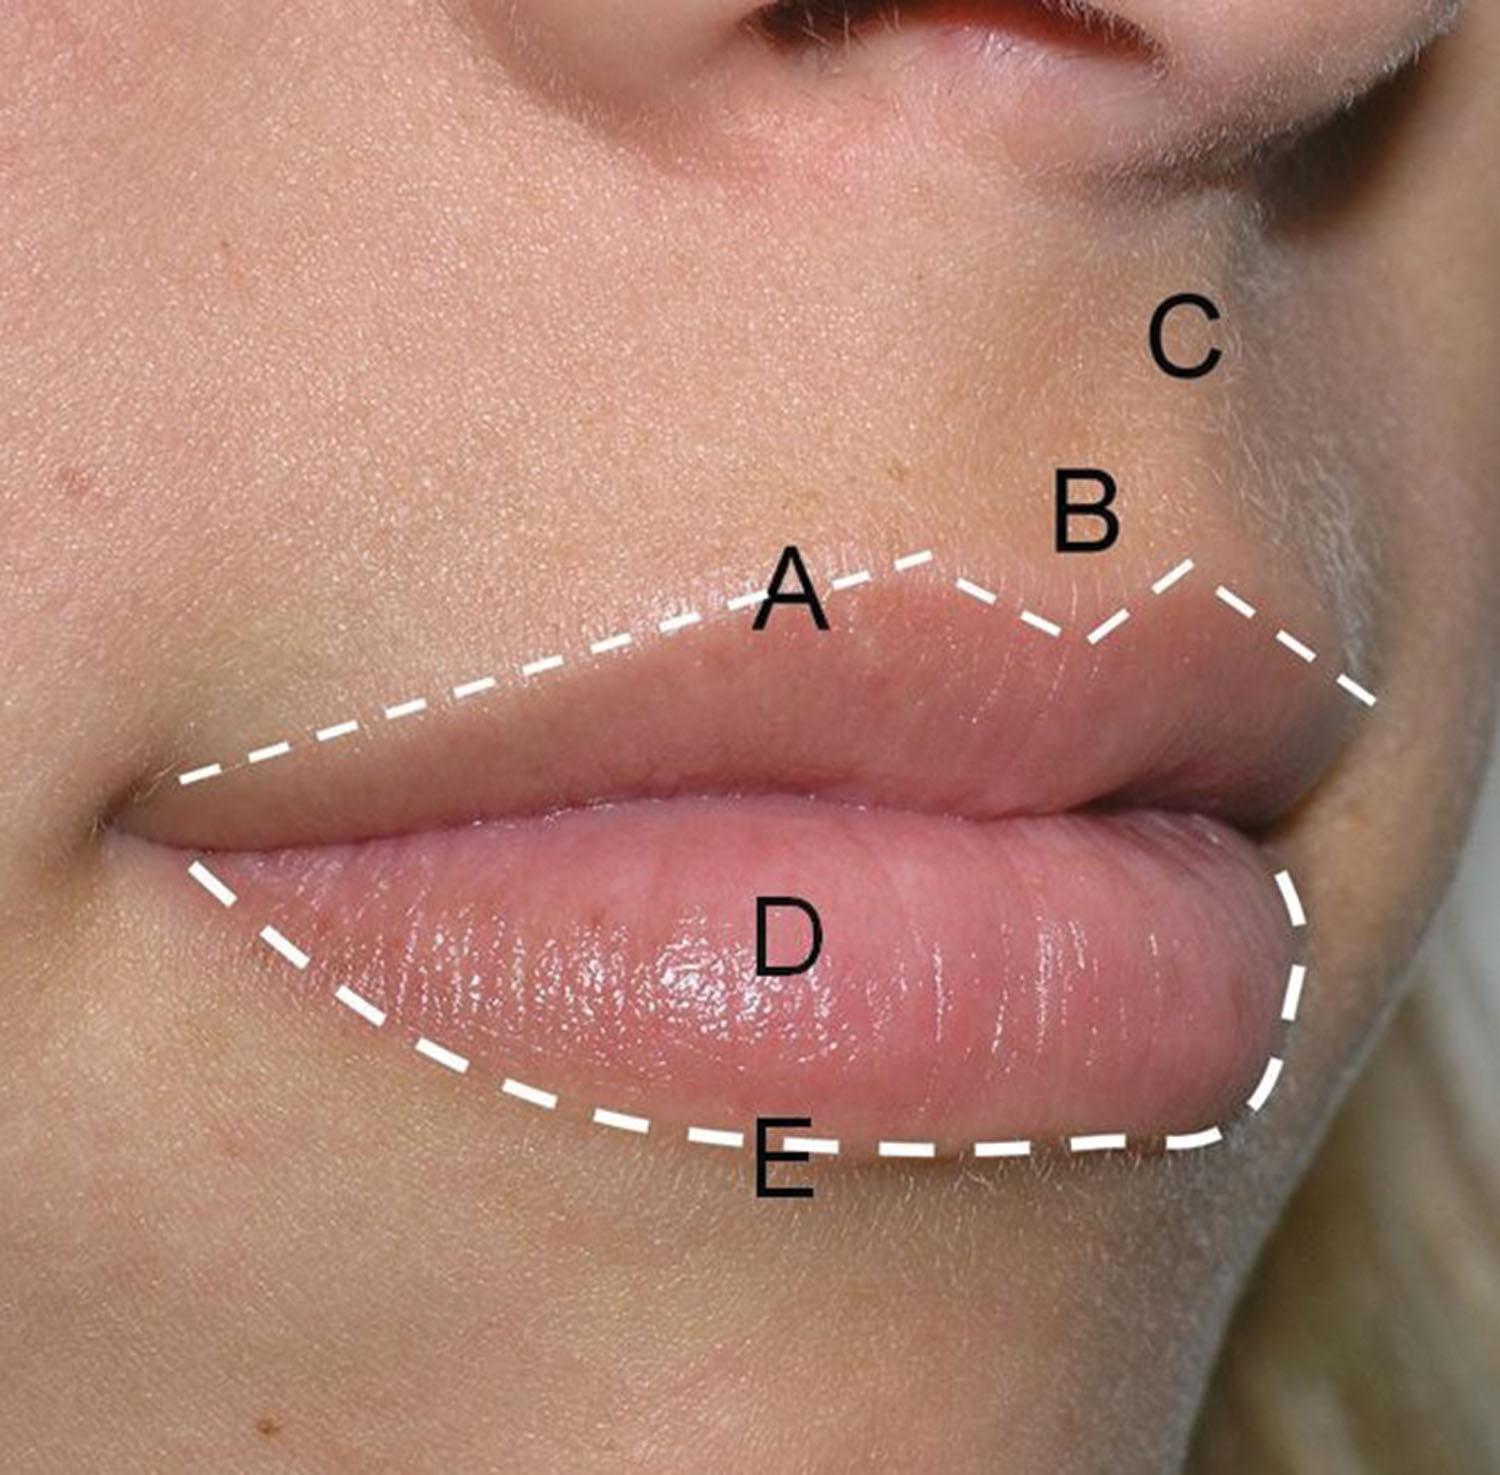 Fig. 10.12, All injectors must have a comprehensive understanding of perioral anatomy to achieve aesthetic results. Some of the more important landmarks (indicated by the white dashed line ) include (A) Cupid’s Bow of the upper lip, (B) philtrum (C) philtral column, (D) lower lip vermilion, and (E) the white roll of the lower lip.